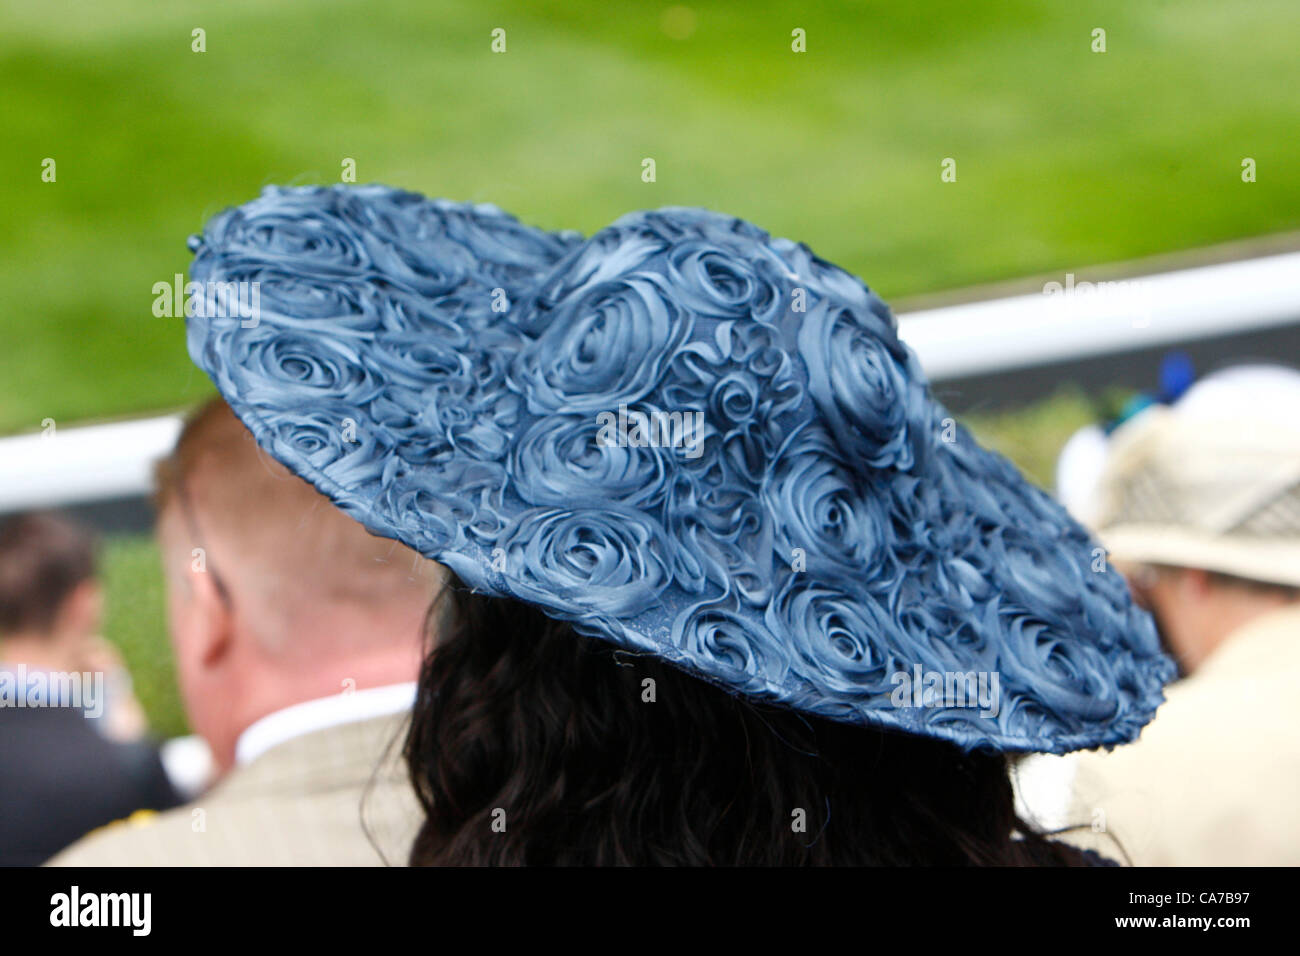 21.06.12 Ascot, Windsor, ENGLAND:   during Ladies Day Royal Ascot Festival at Ascot racecourse on June 21, 2012 in Ascot, England. Stock Photo